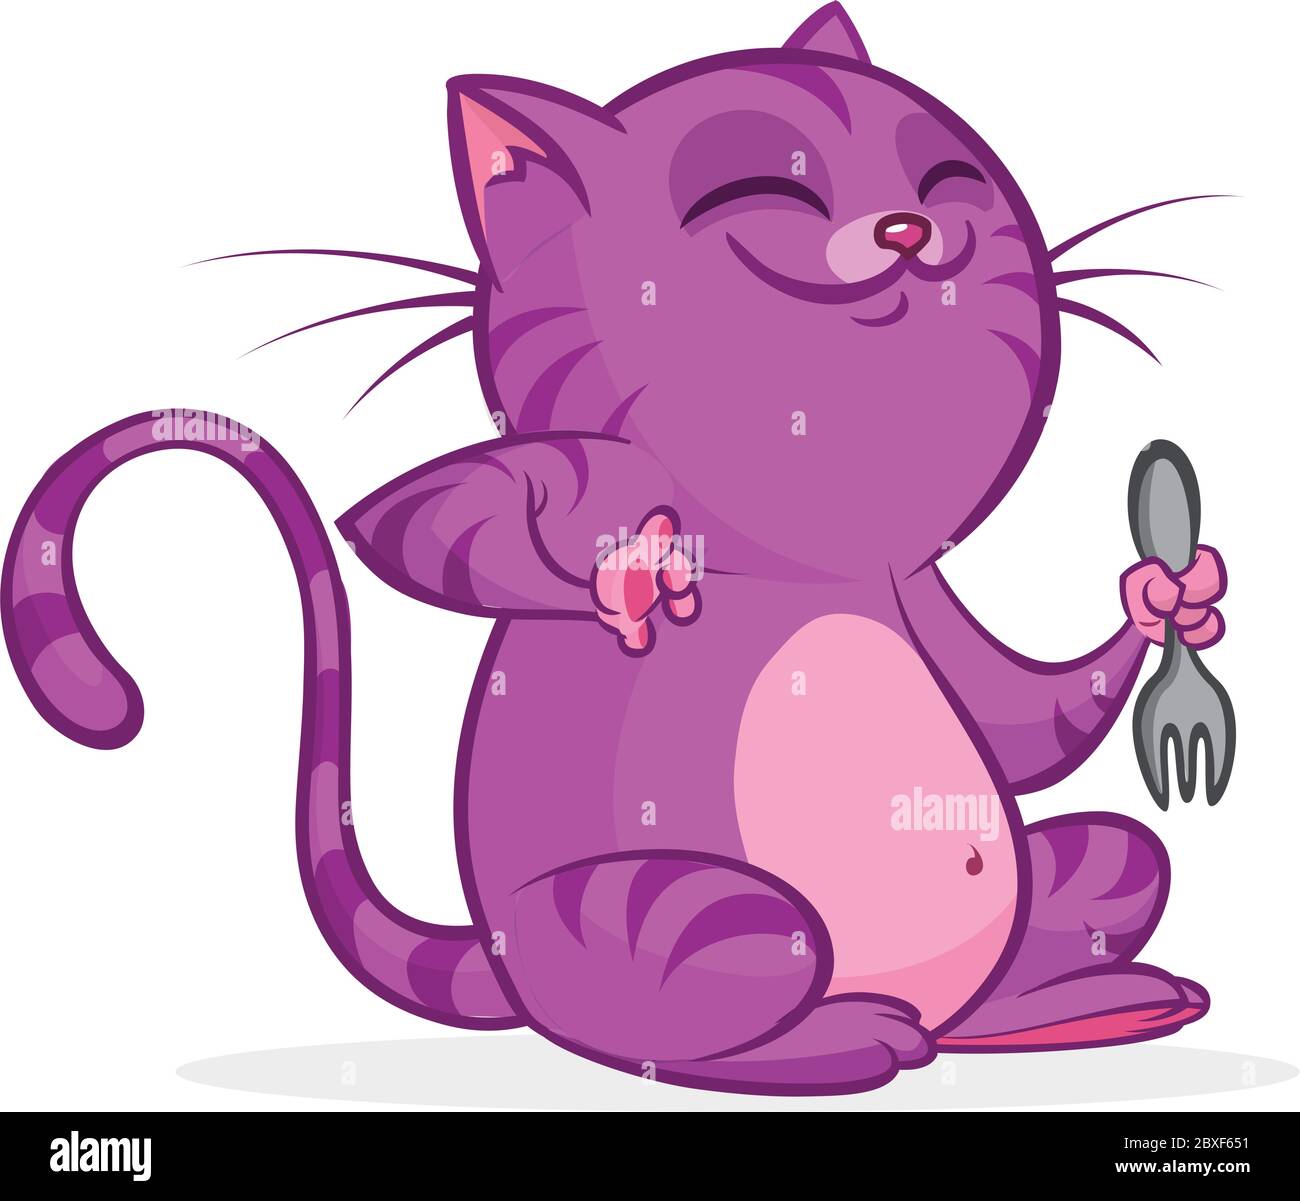 Fat Cat Realistic Cartoon Illustration with Human-like Body Angry Face.  Stock Illustration - Illustration of domestic, digitally: 271620449